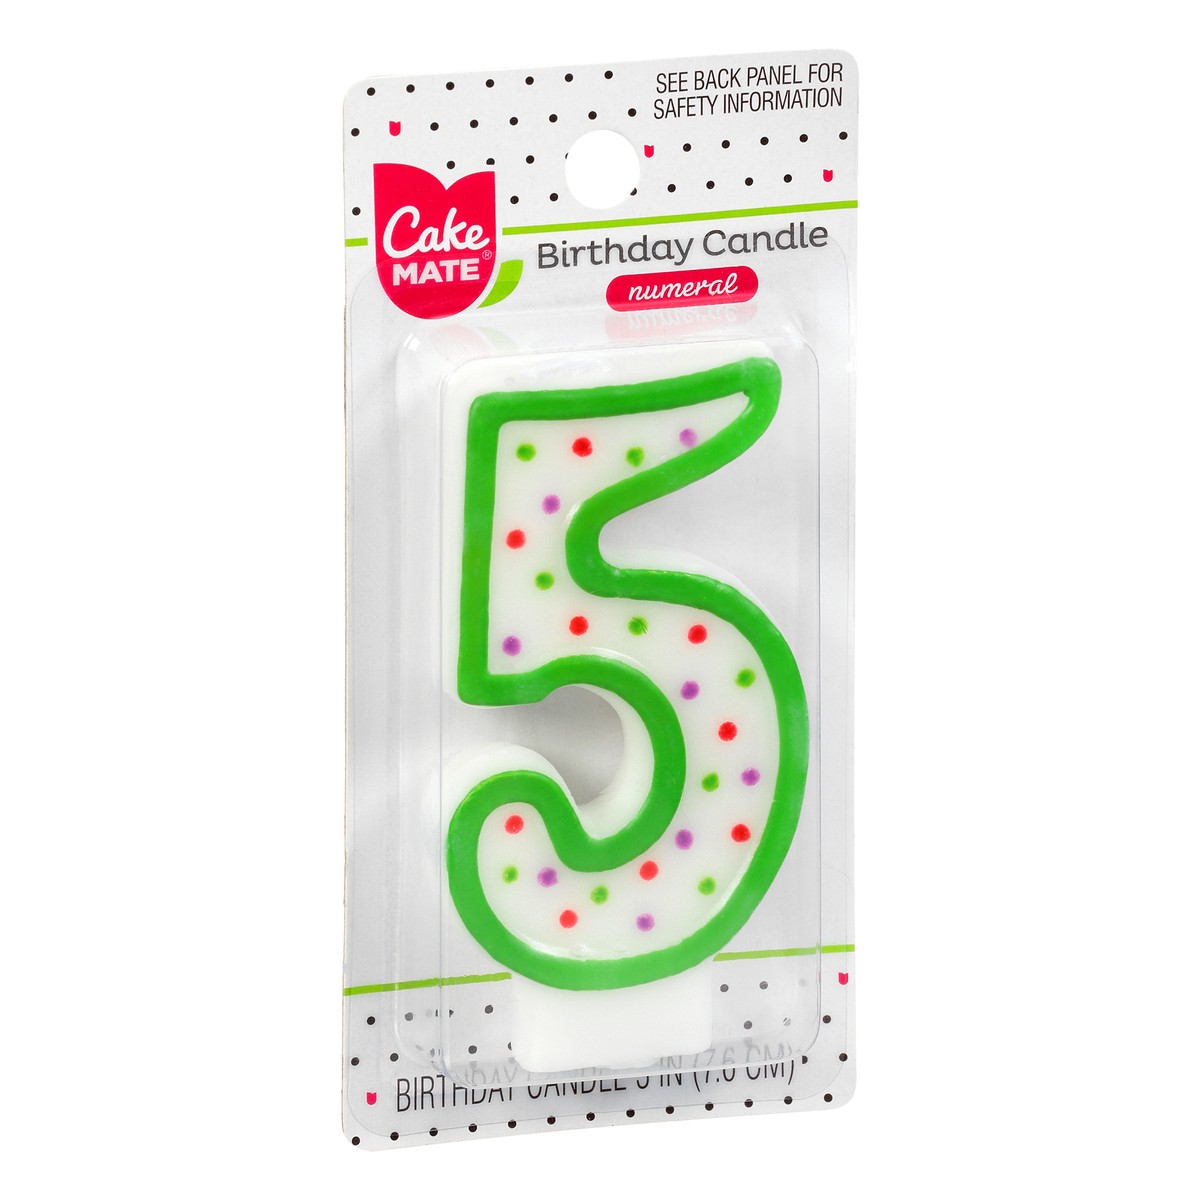 slide 2 of 9, Cake Mate 3 Inch 5 Numeral Birthday Candle 1 ea, 1 ea